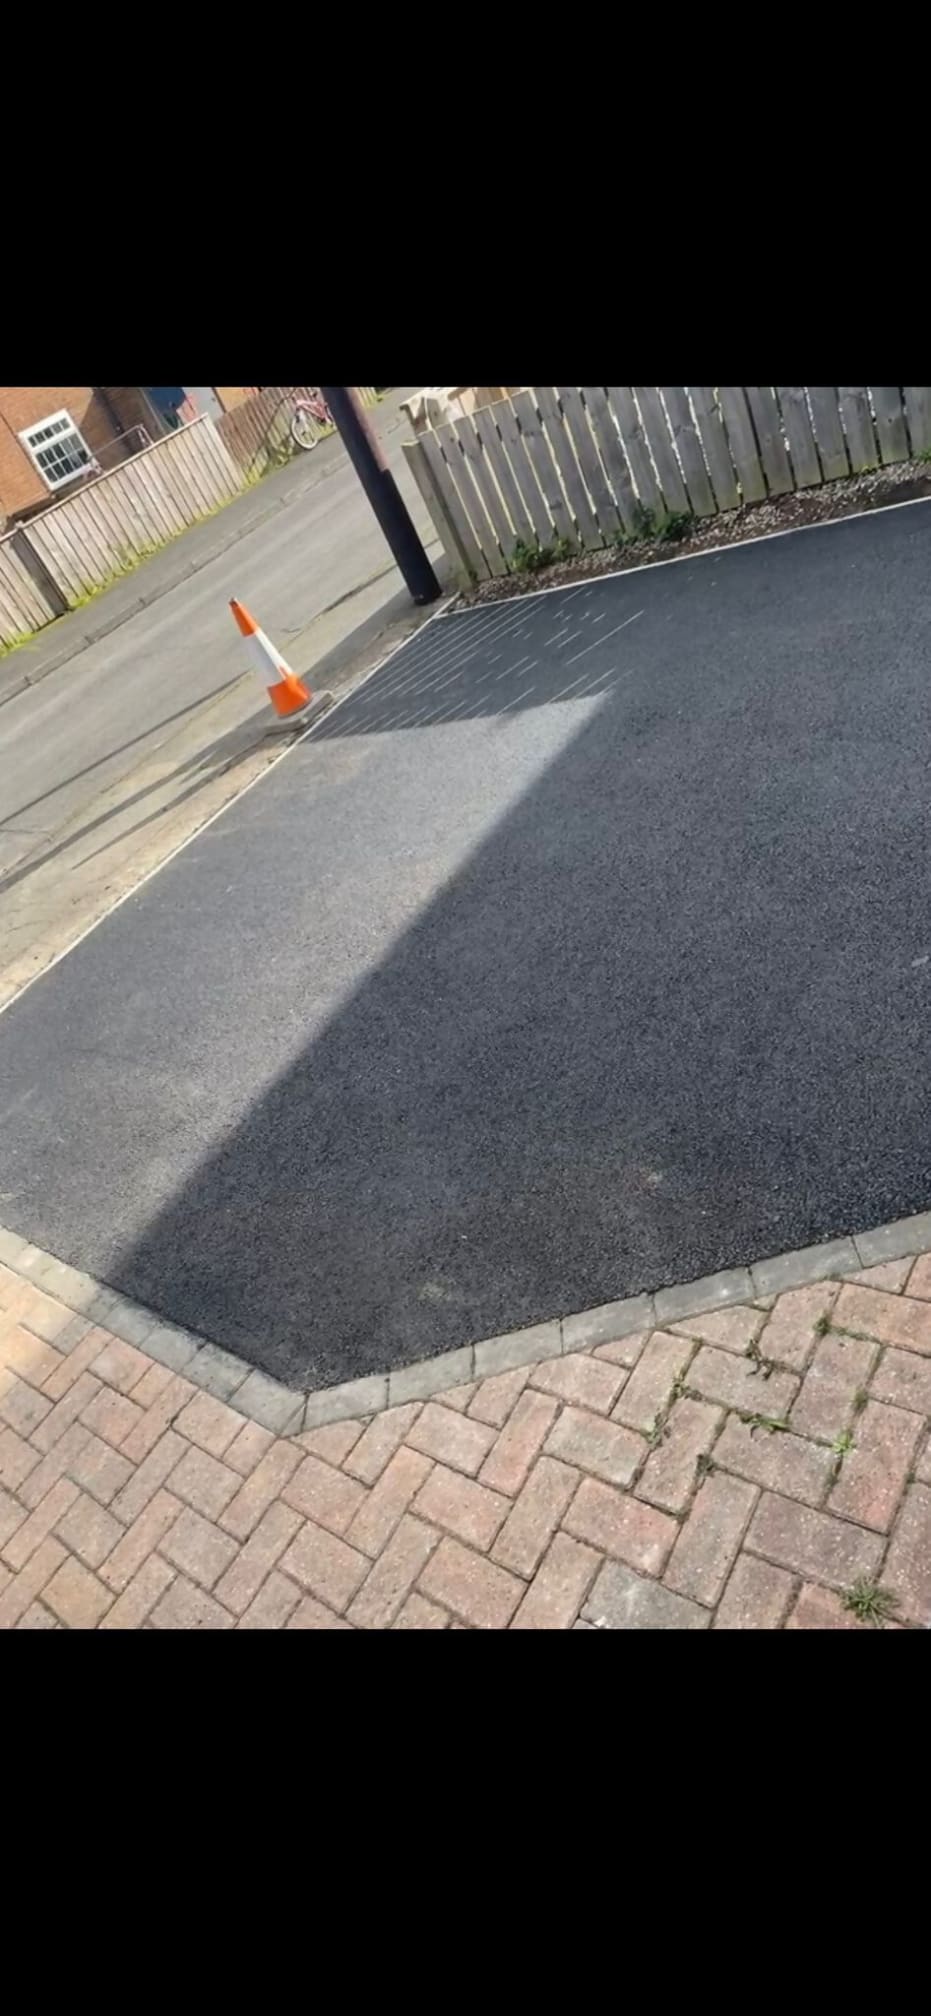 CLS Surfacing Ltd Chester Le Street 07506 516000